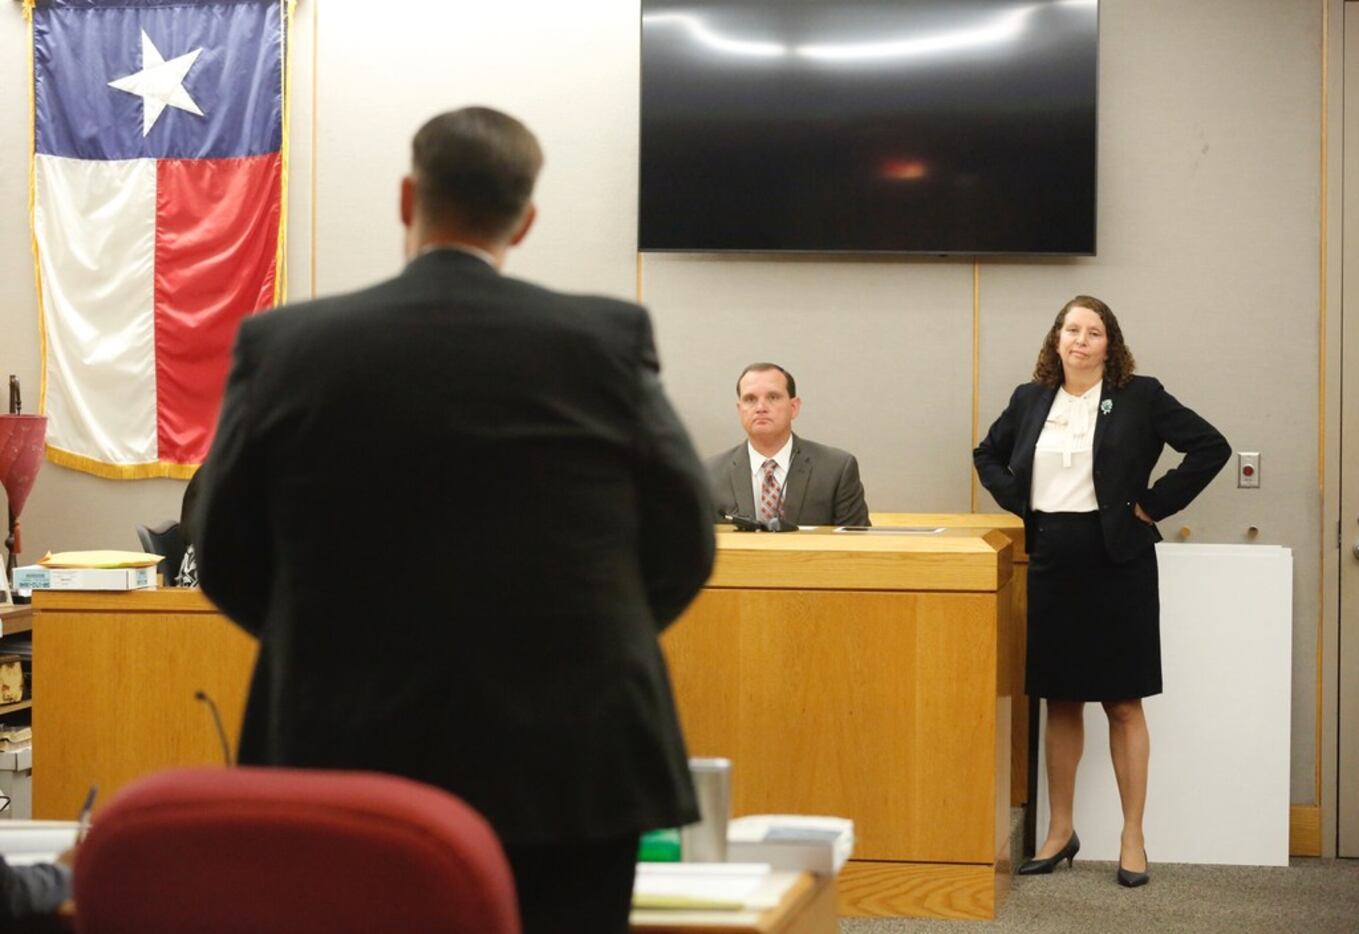 Mesquite police investigator Brent Ehrenberger (center) and defense attorney Kathy Lowthorp...